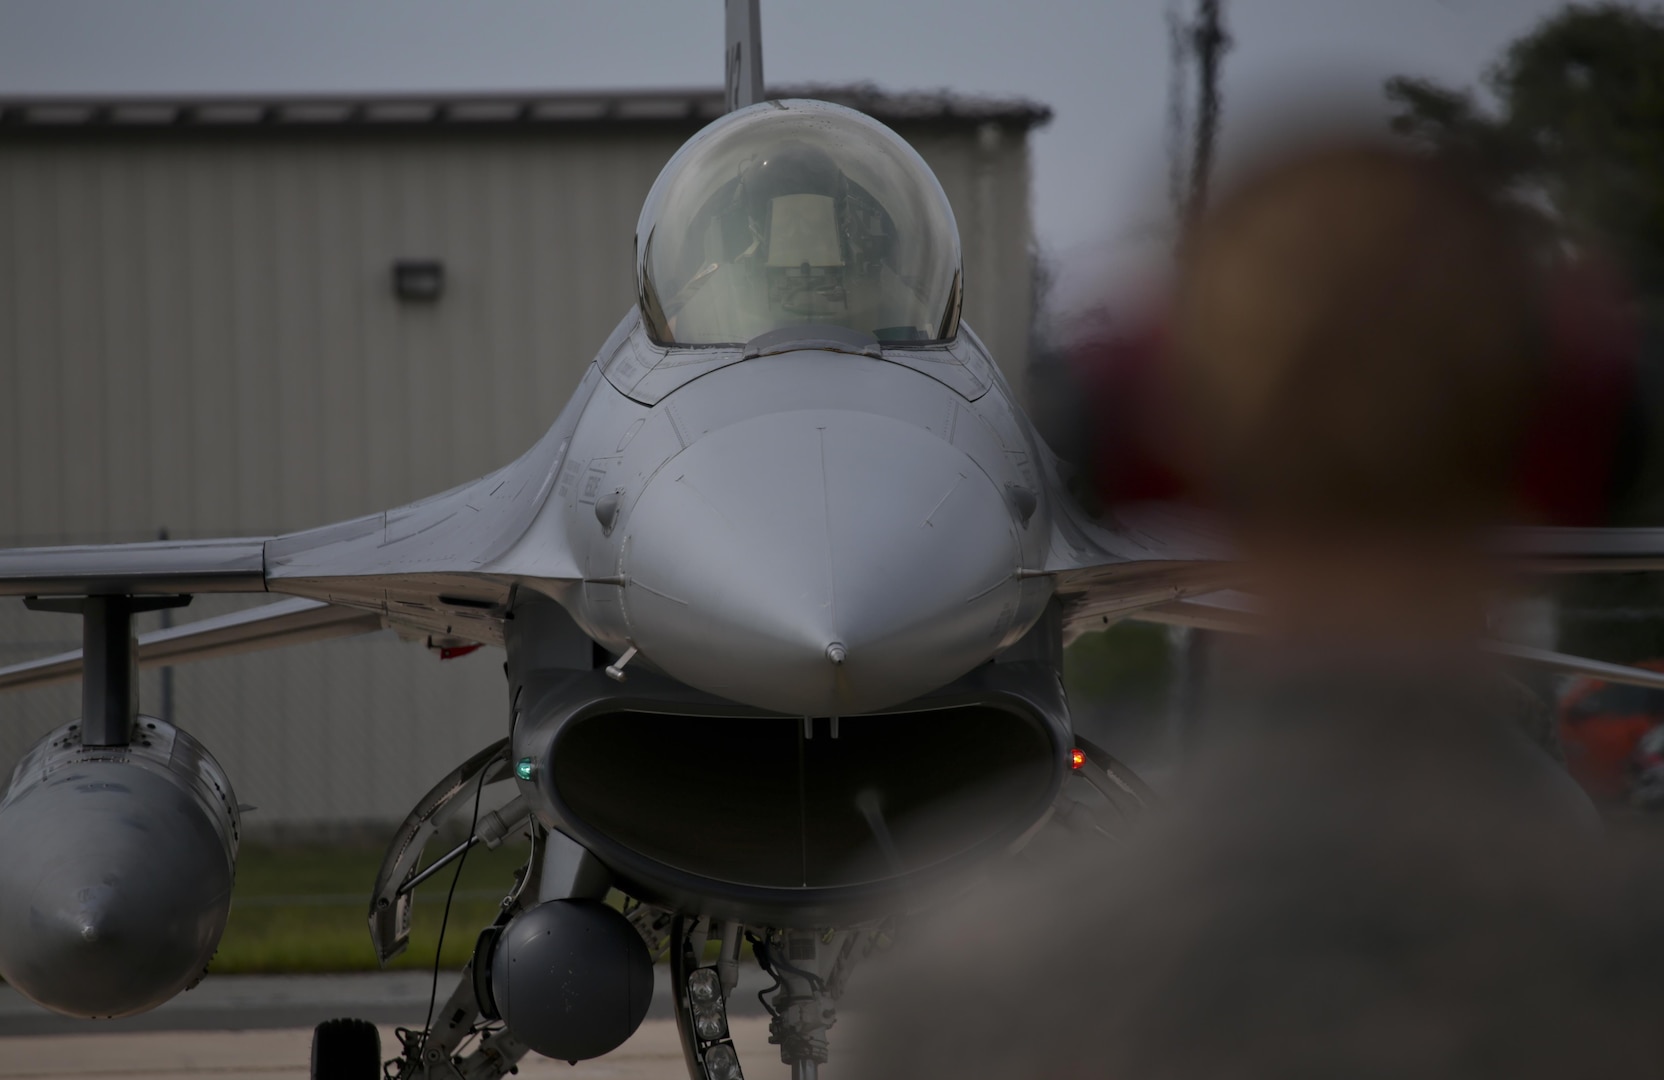 New Jersey Air National Guard Col. Bradford Everman, 119th Fighter Squadron Commander, prepares his F-16D Fighting Falcon for a flight during a three-day Aeropsace Control Alert CrossTell live-fly training exercise at Atlantic City Air National Guard Base, N.J., May 23, 2017. Representatives from the Air National Guard fighter wings, Civil Air Patrol, and U.S. Coast Guard rotary-wing air intercept units will conduct daily sorties from May 23-25 to hone their skills with tactical-level air-intercept procedures. (U.S. Air National Guard photo by Master Sgt. Matt Hecht/Released)